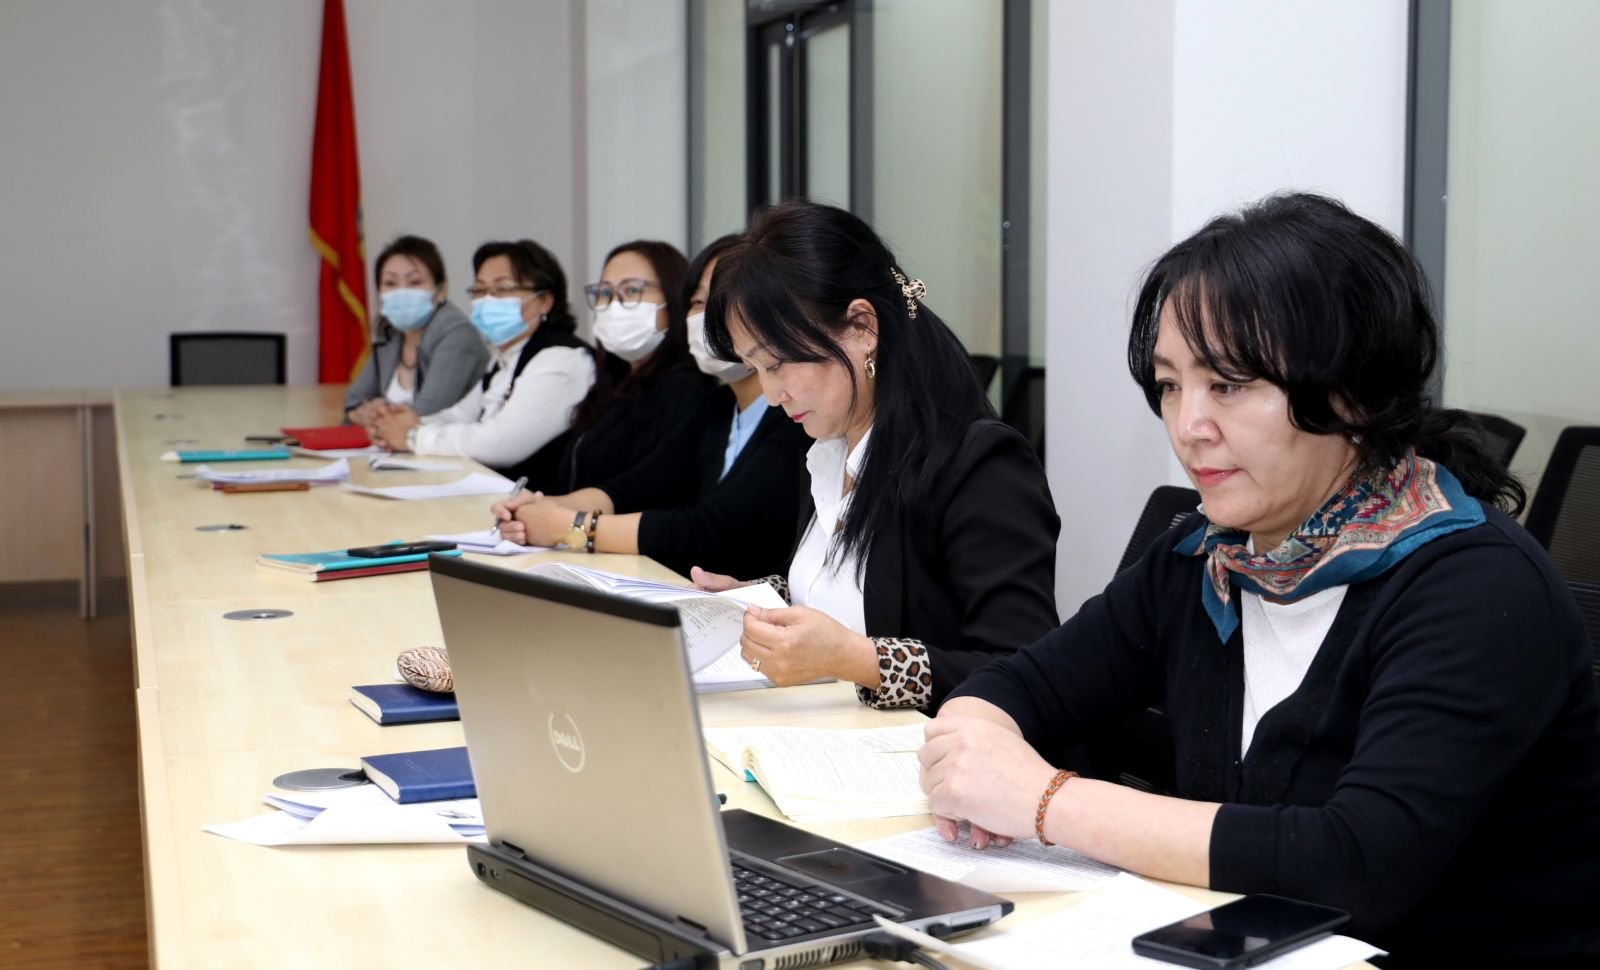 The registration officers of the diplomatic missions took part in the online training